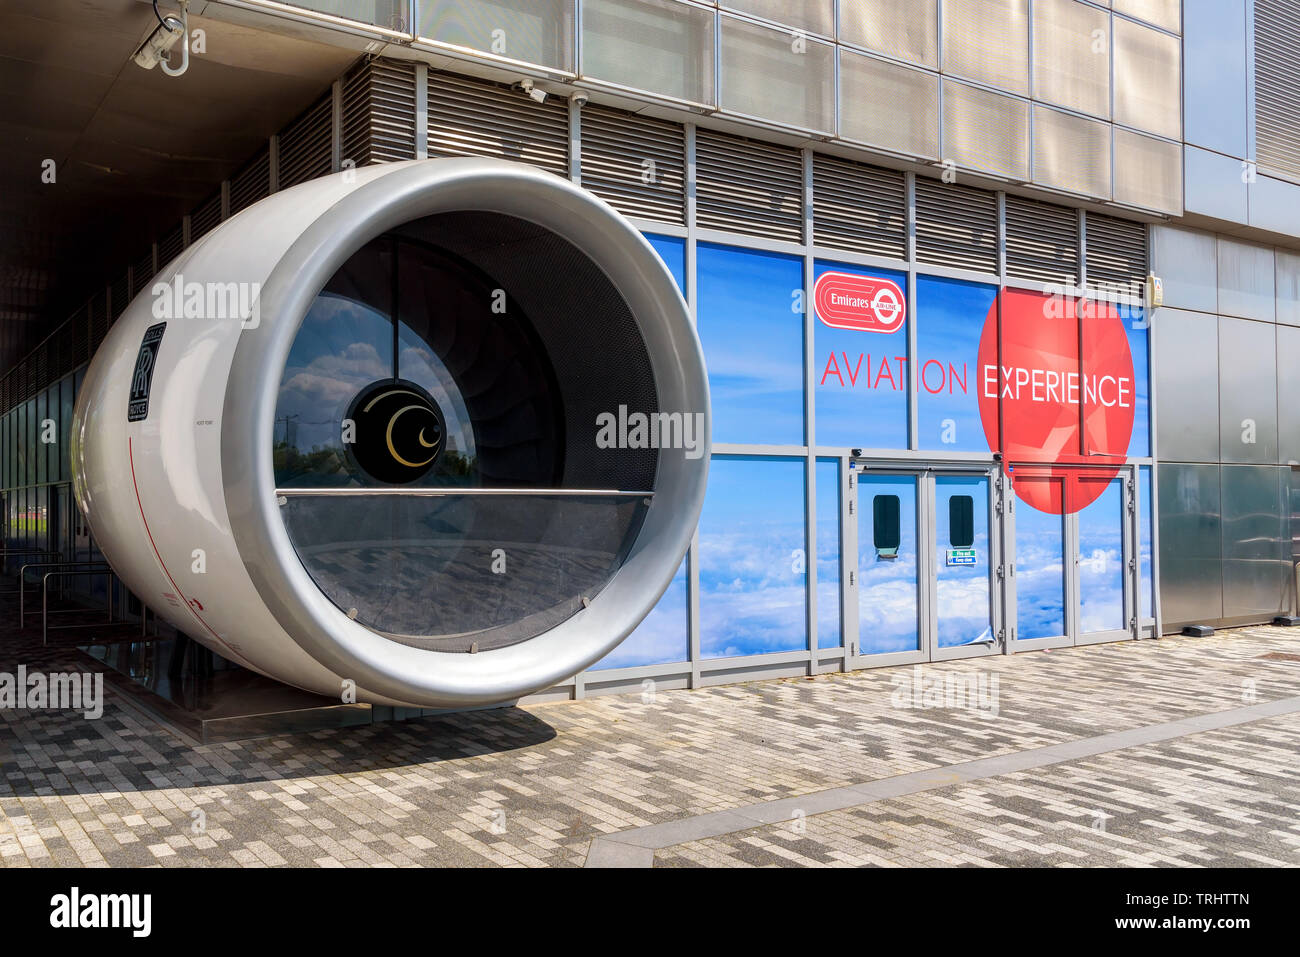 London, UK - May 1, 2018: Model of jet airplane engine at the entrance to Emirates Air Line Aviation Experience Stock Photo